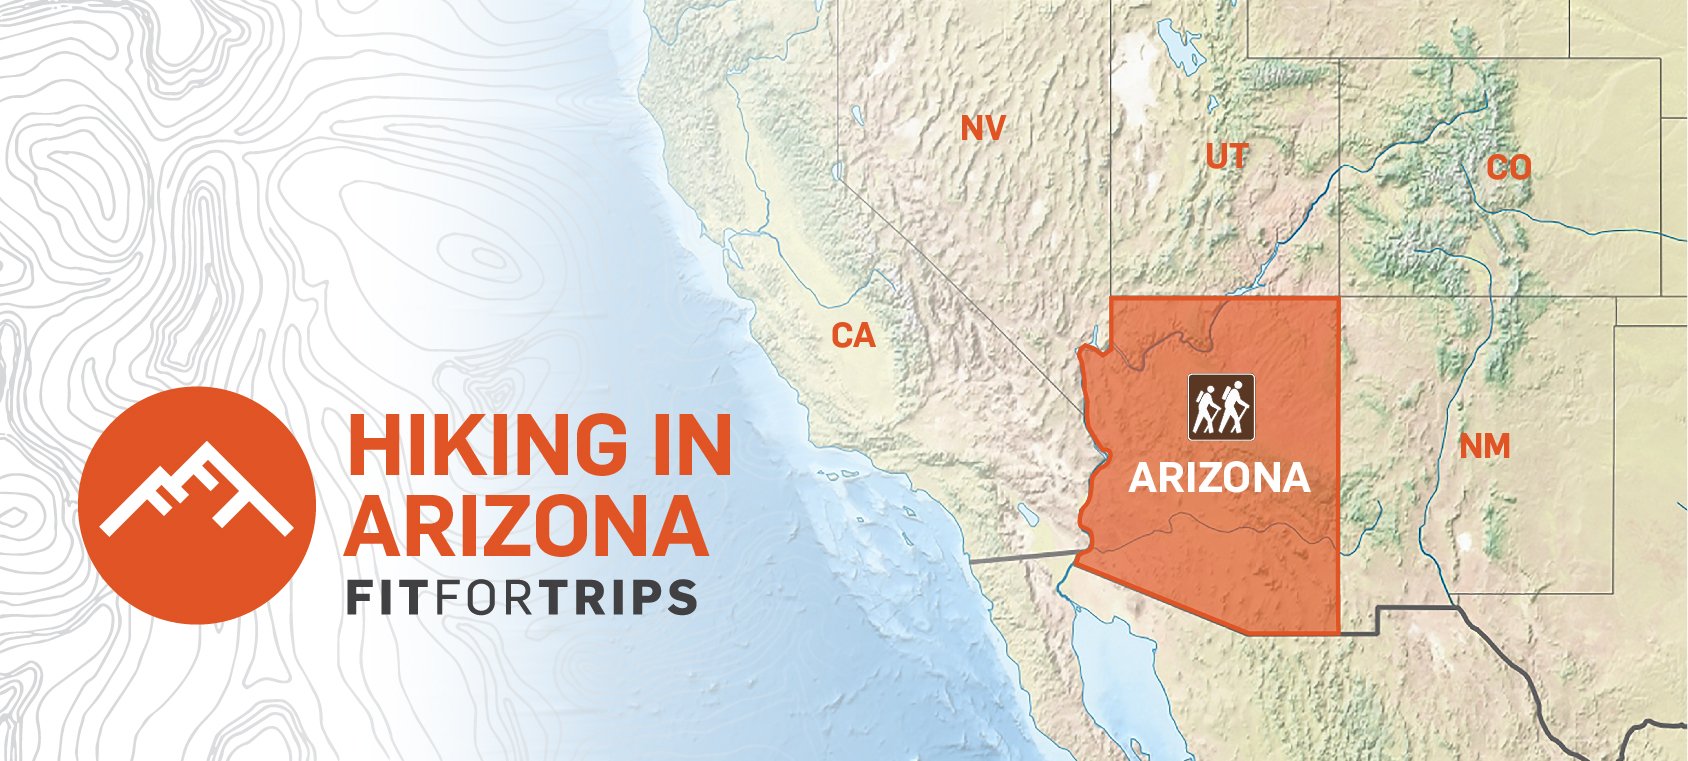 State of Arizona highlighted for hiking on United States map.